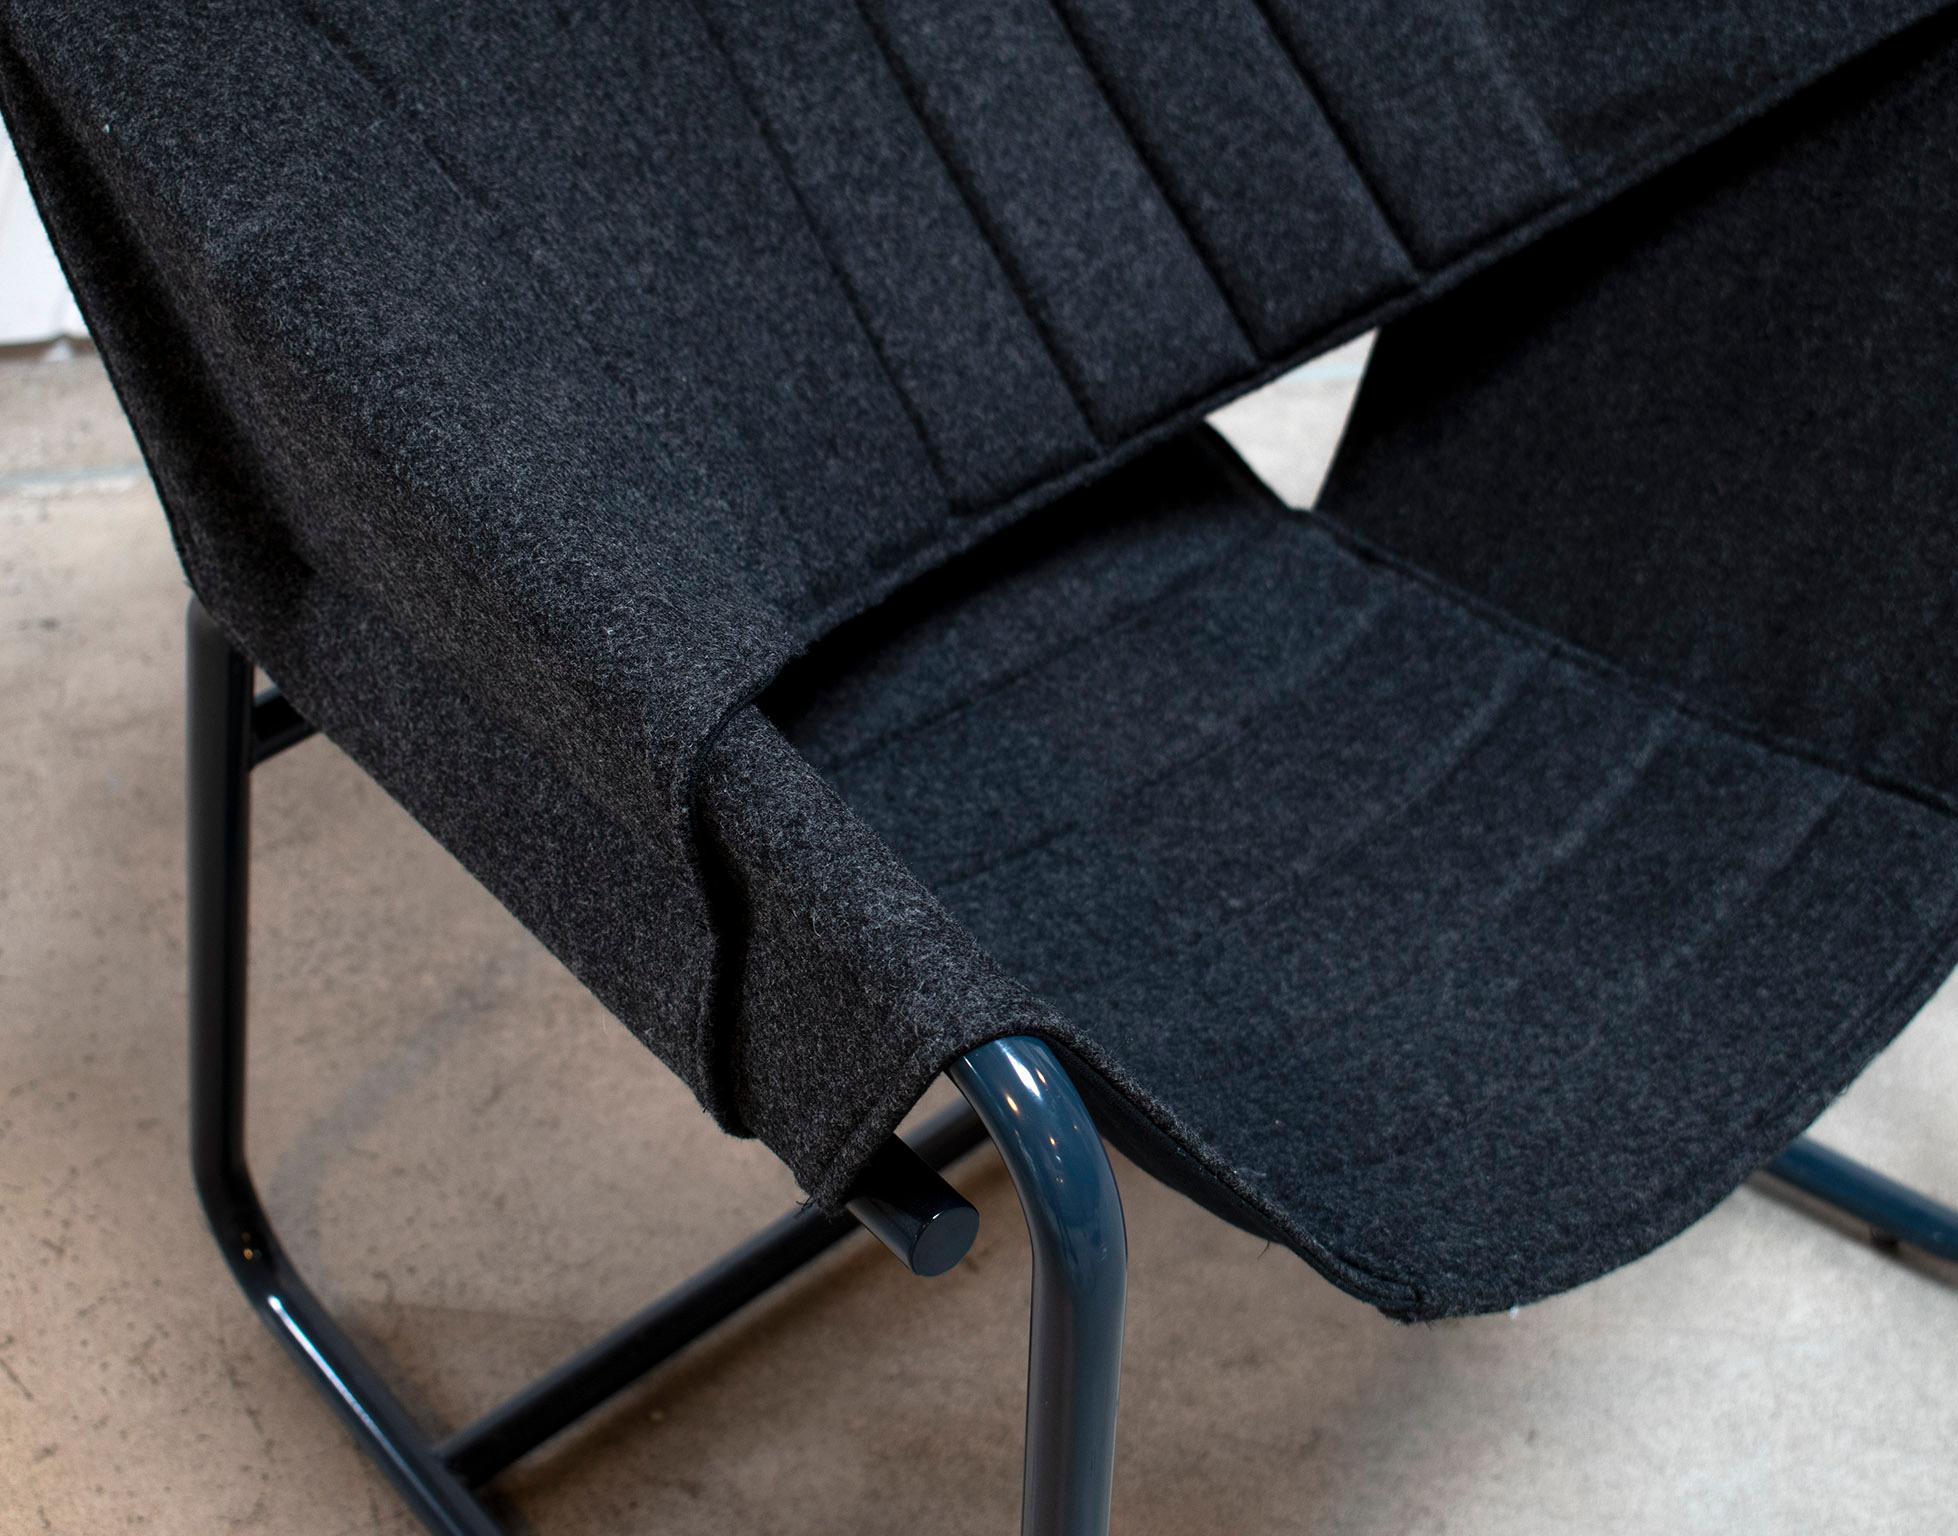 The easy chair combines the casual vibe of sling chairs with the cozy comfort of a Classic club chair all in a floating form reminiscent of midcentury shell chairs. The top layer of the quilted sling is available in a choice of upholstery fabrics